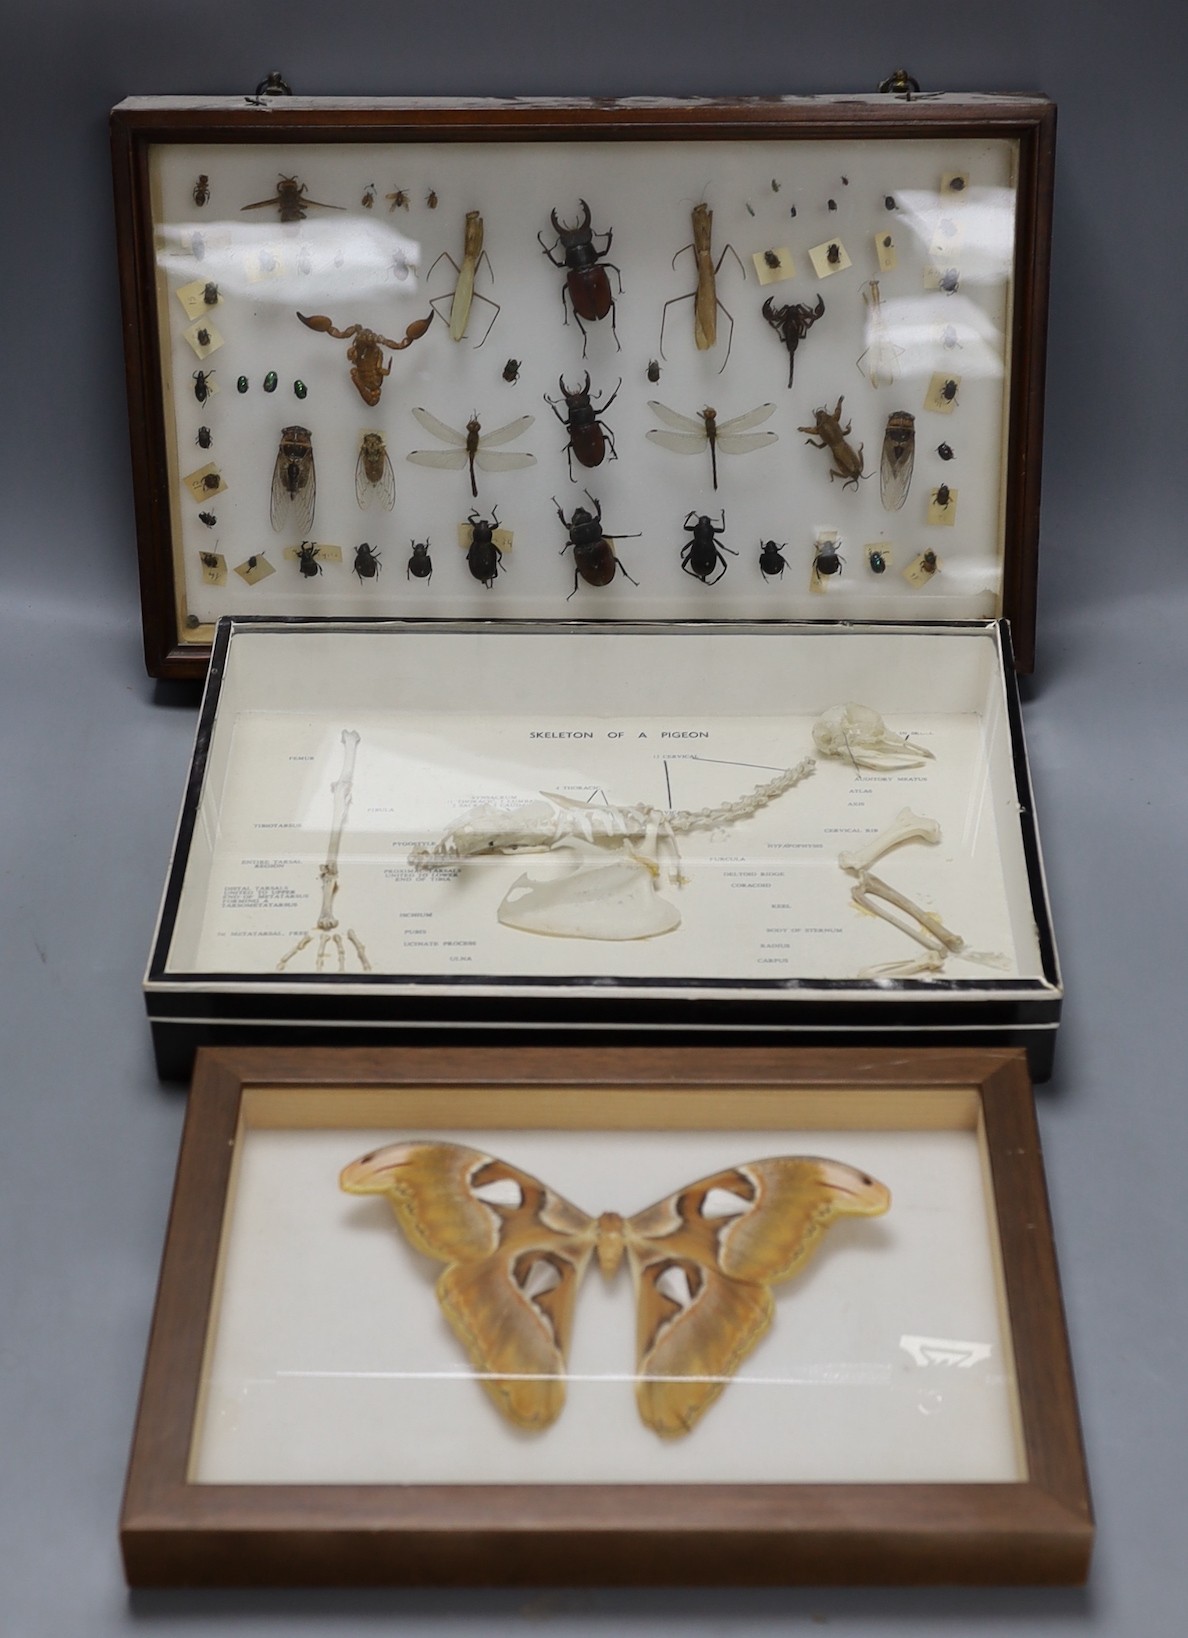 Entomology and Ornithology- beetle, scorpion, cicada, dragonfly etc. specimens in a glazed case, 41 cm wide, skeleton of a pigeon in a glazed box, 36 cm wide and an Atlas moth in a glazed case, 32 cm wide (3)